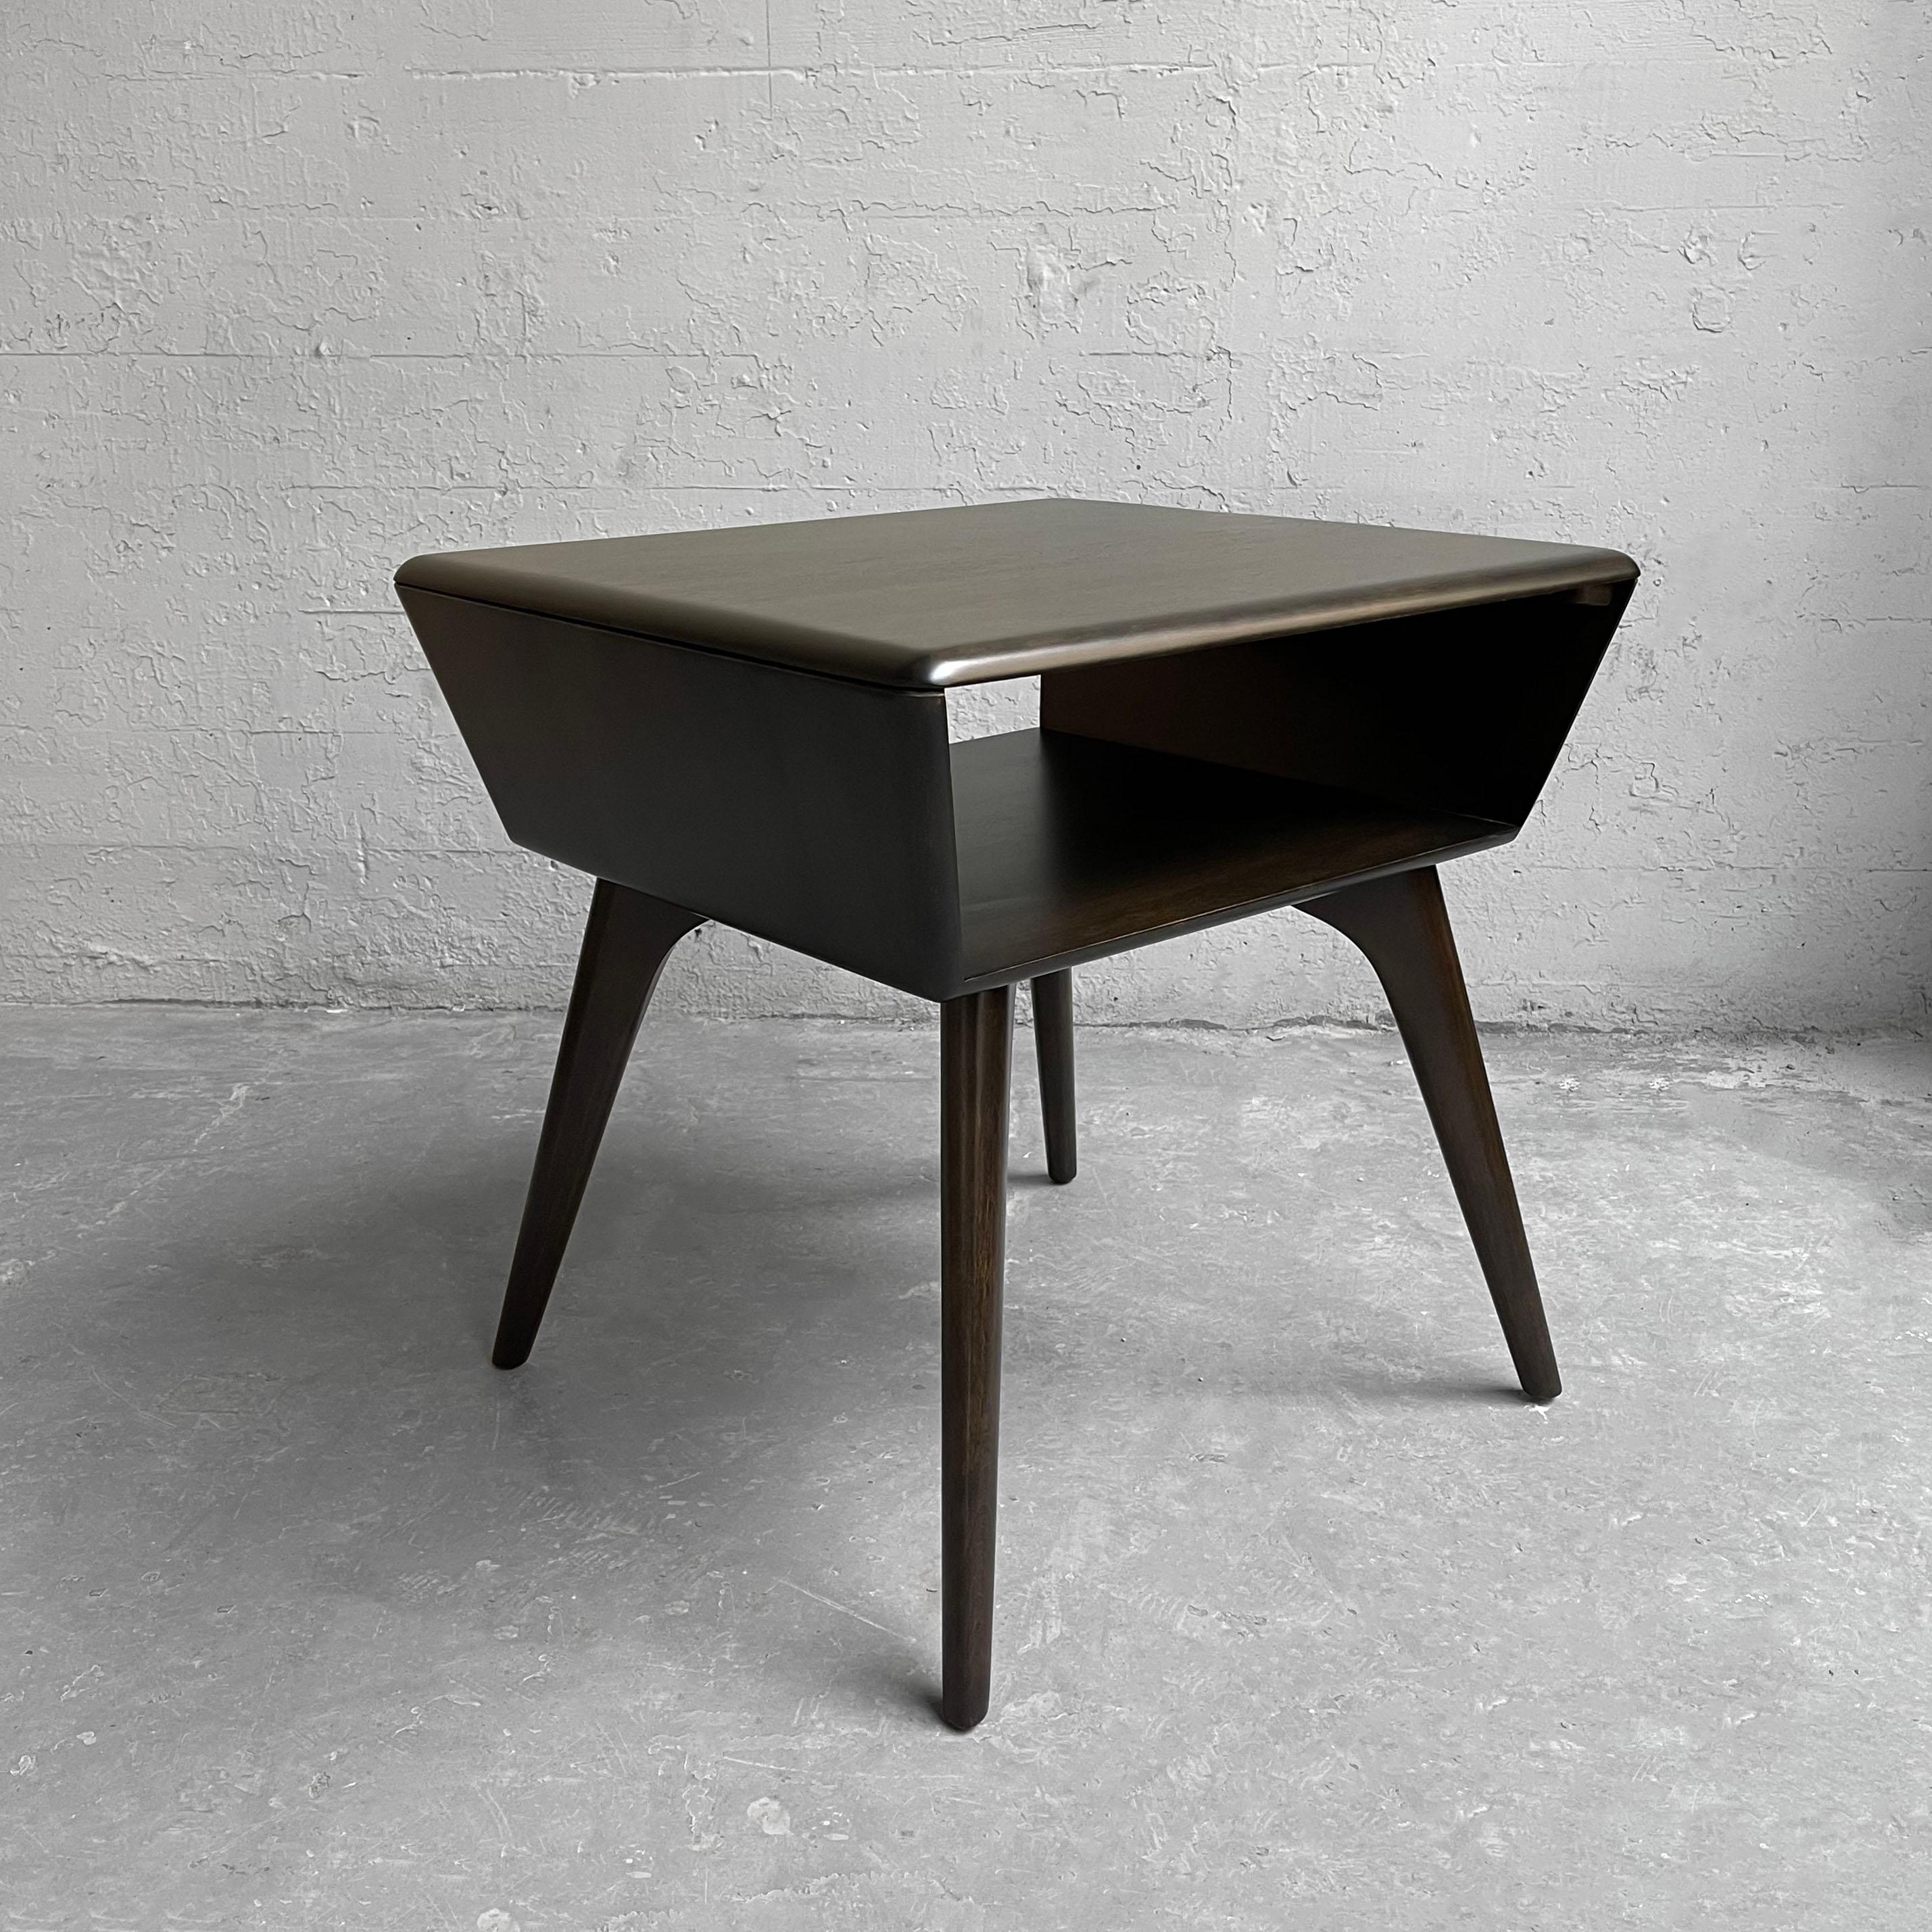 Classic, Mid-Century Modern, ebonized maple, open side table or lamp table by Heywood Wakefield features an open compartment for books or magazines at 6.5 inches height.